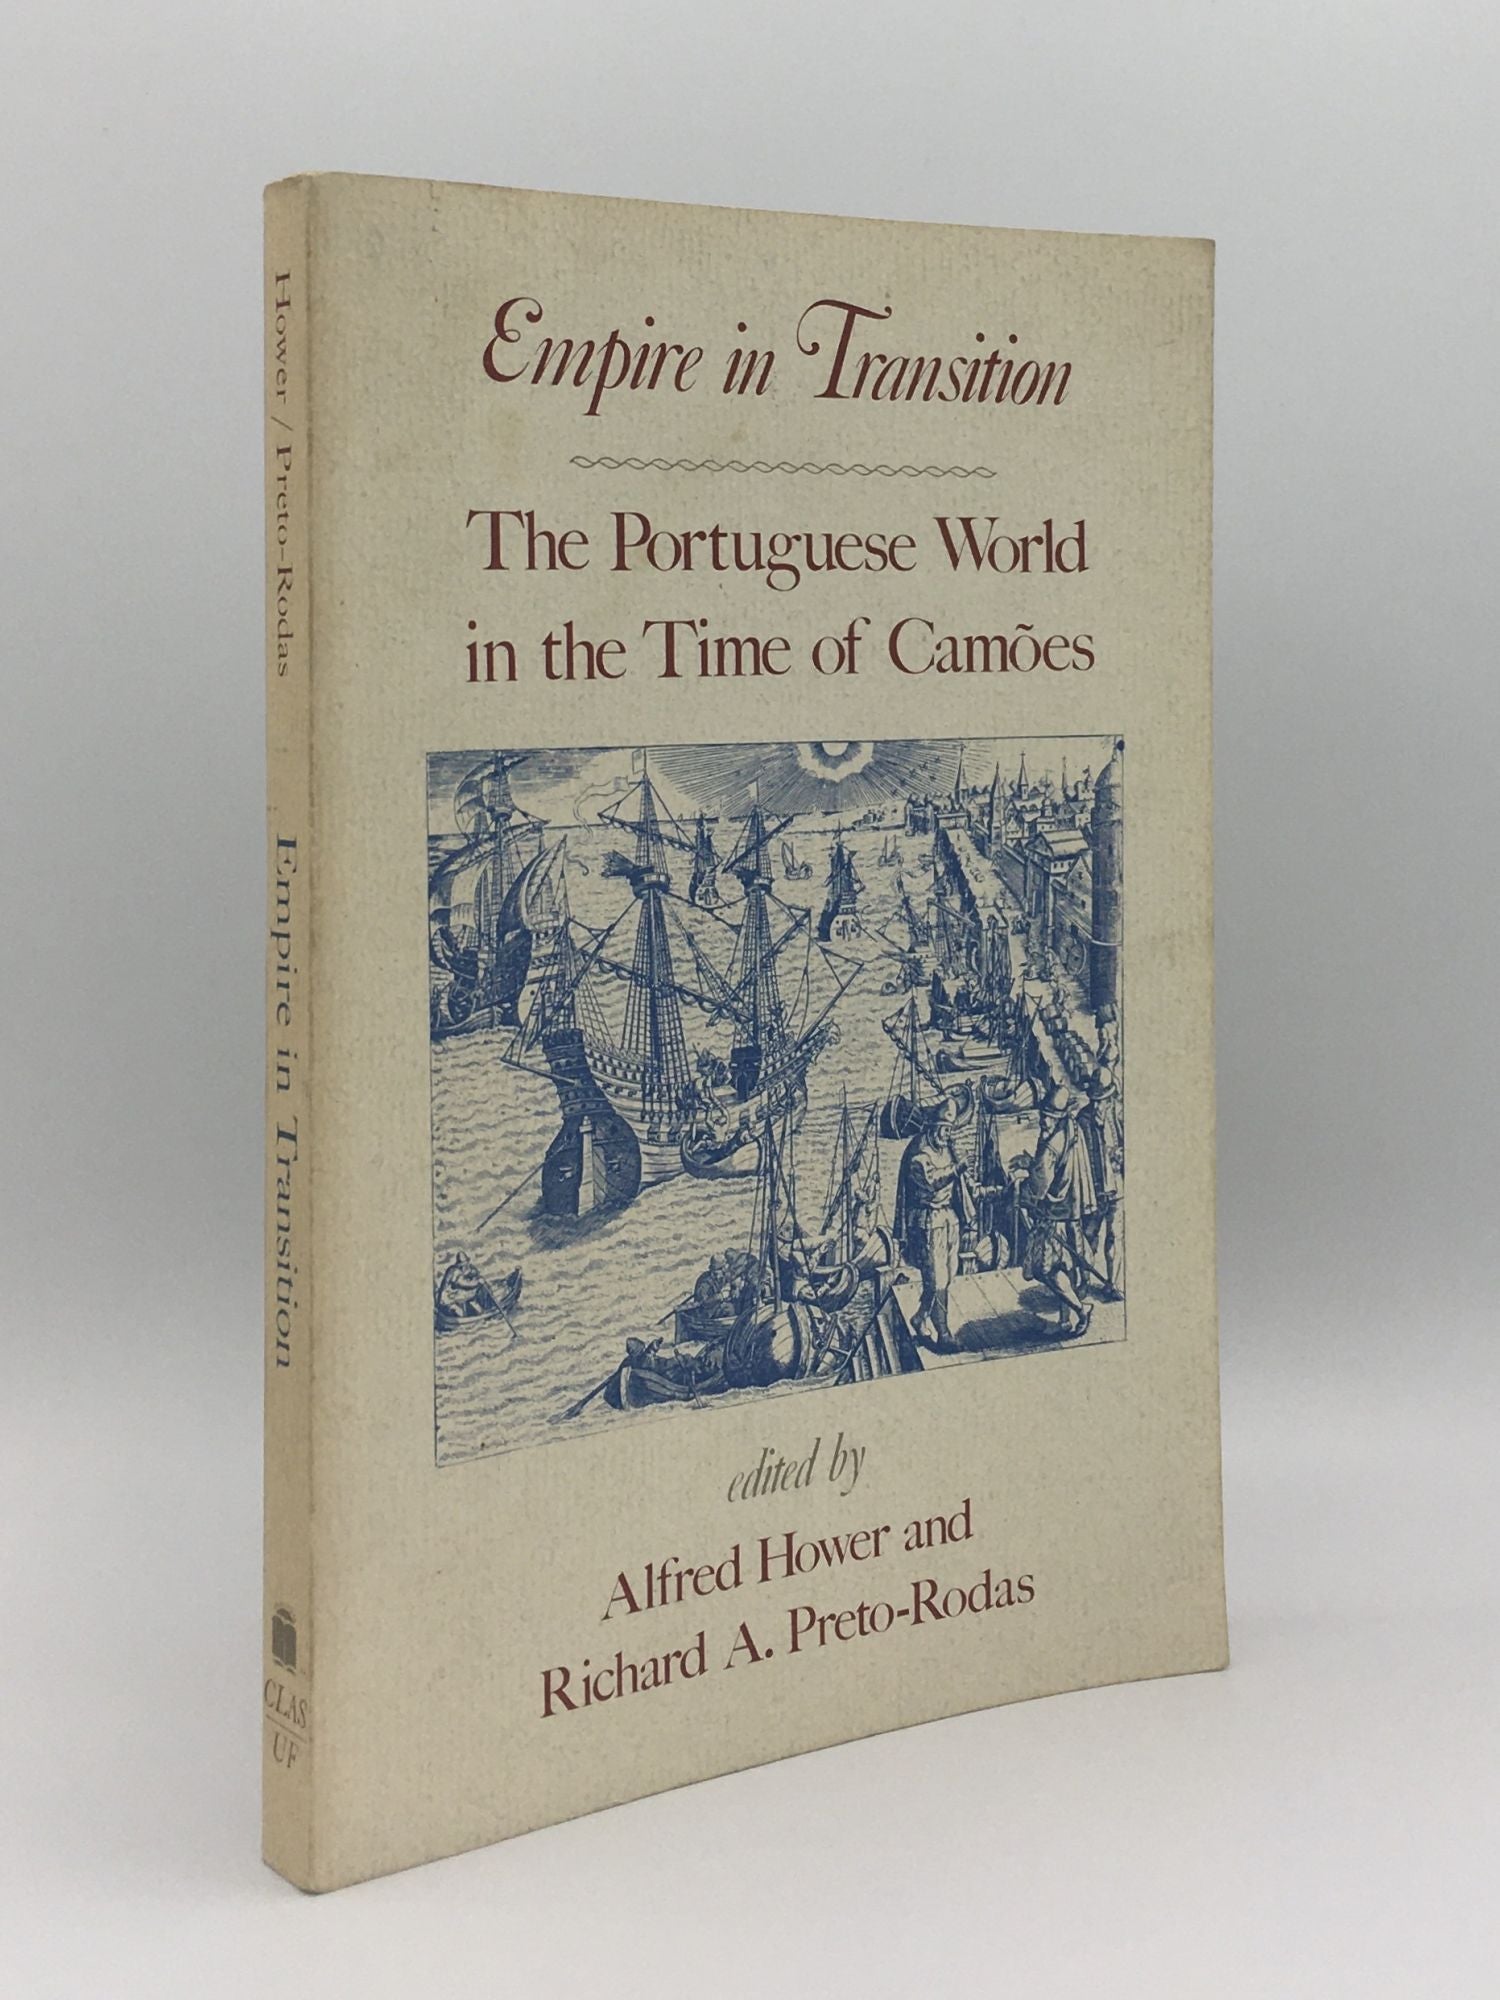 HOWER Alfred, PRETO-RODAS Richard A. - Empire in Transition the Portuguese World in the Time of Camoes